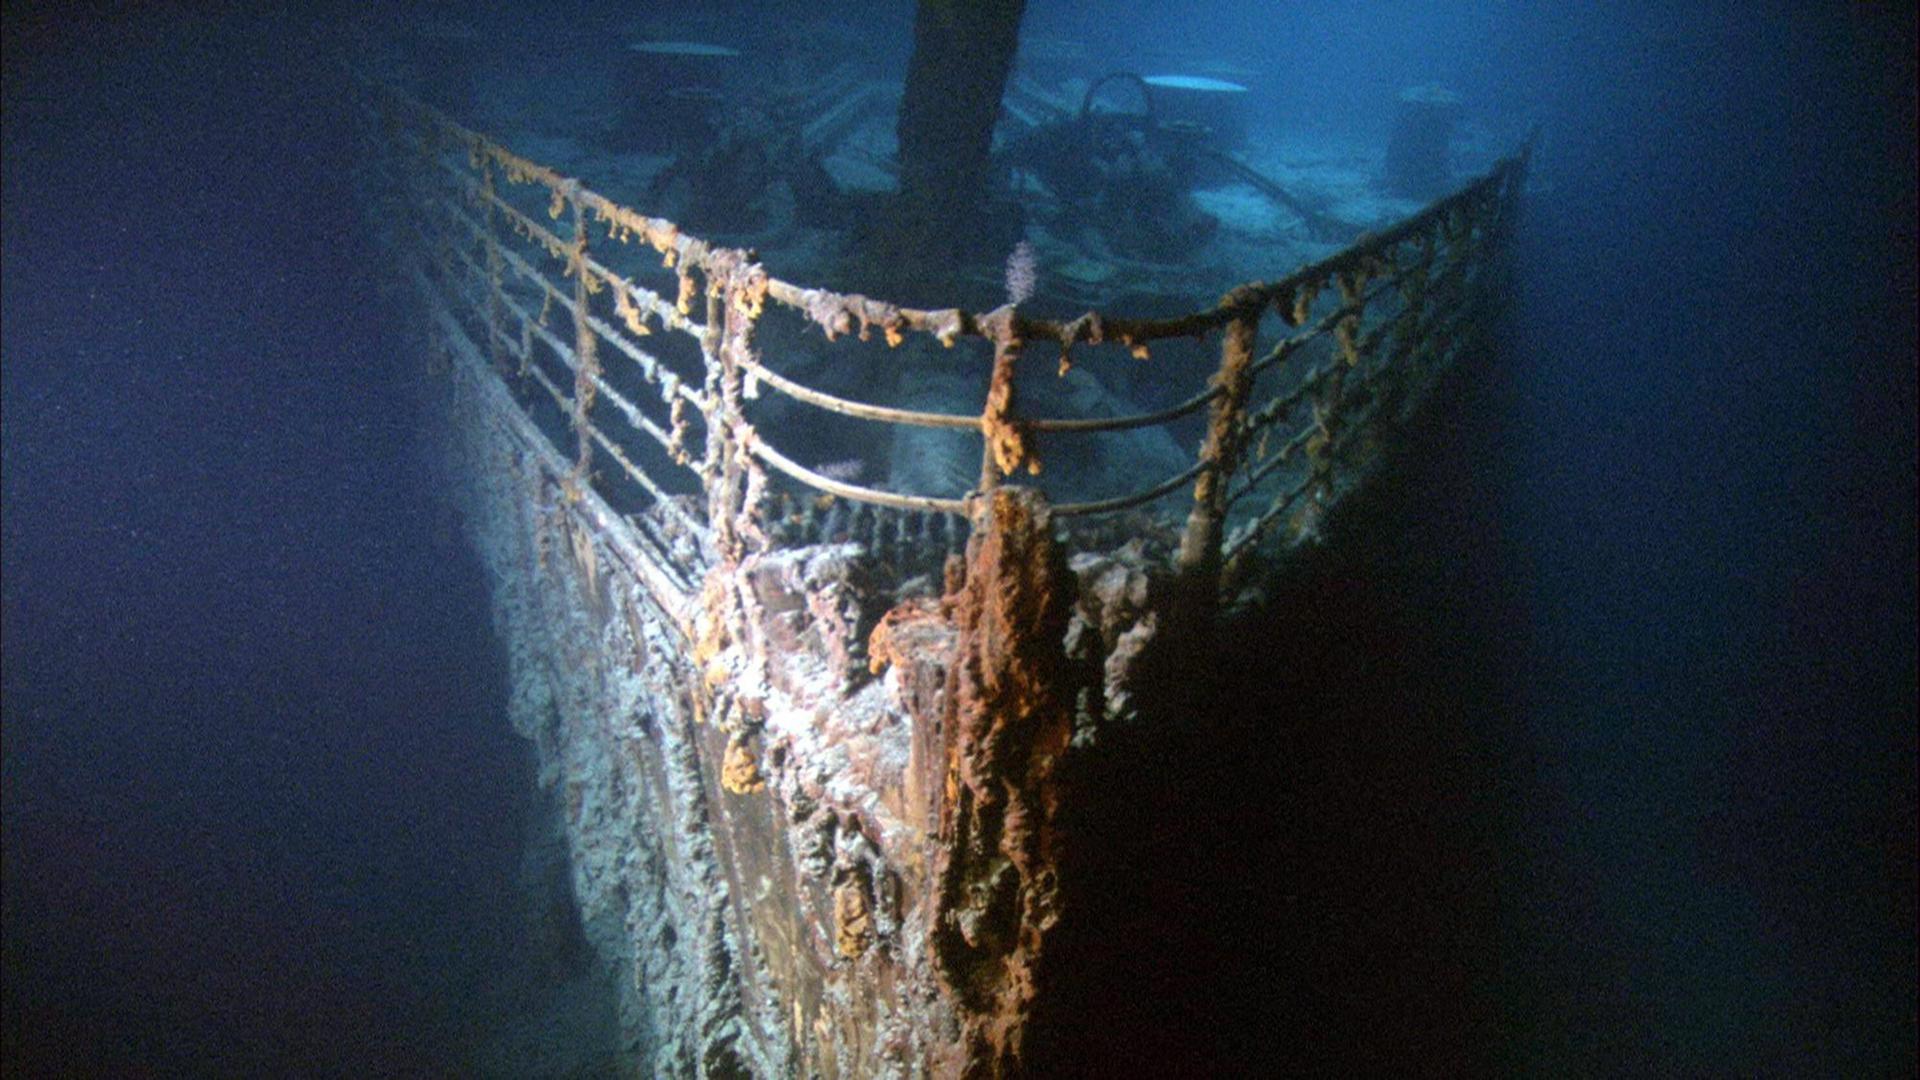 GHOSTS OF THE ABYSS, Titanic s bow, 2003. Walt Disney/Courtesy: Everett Collection